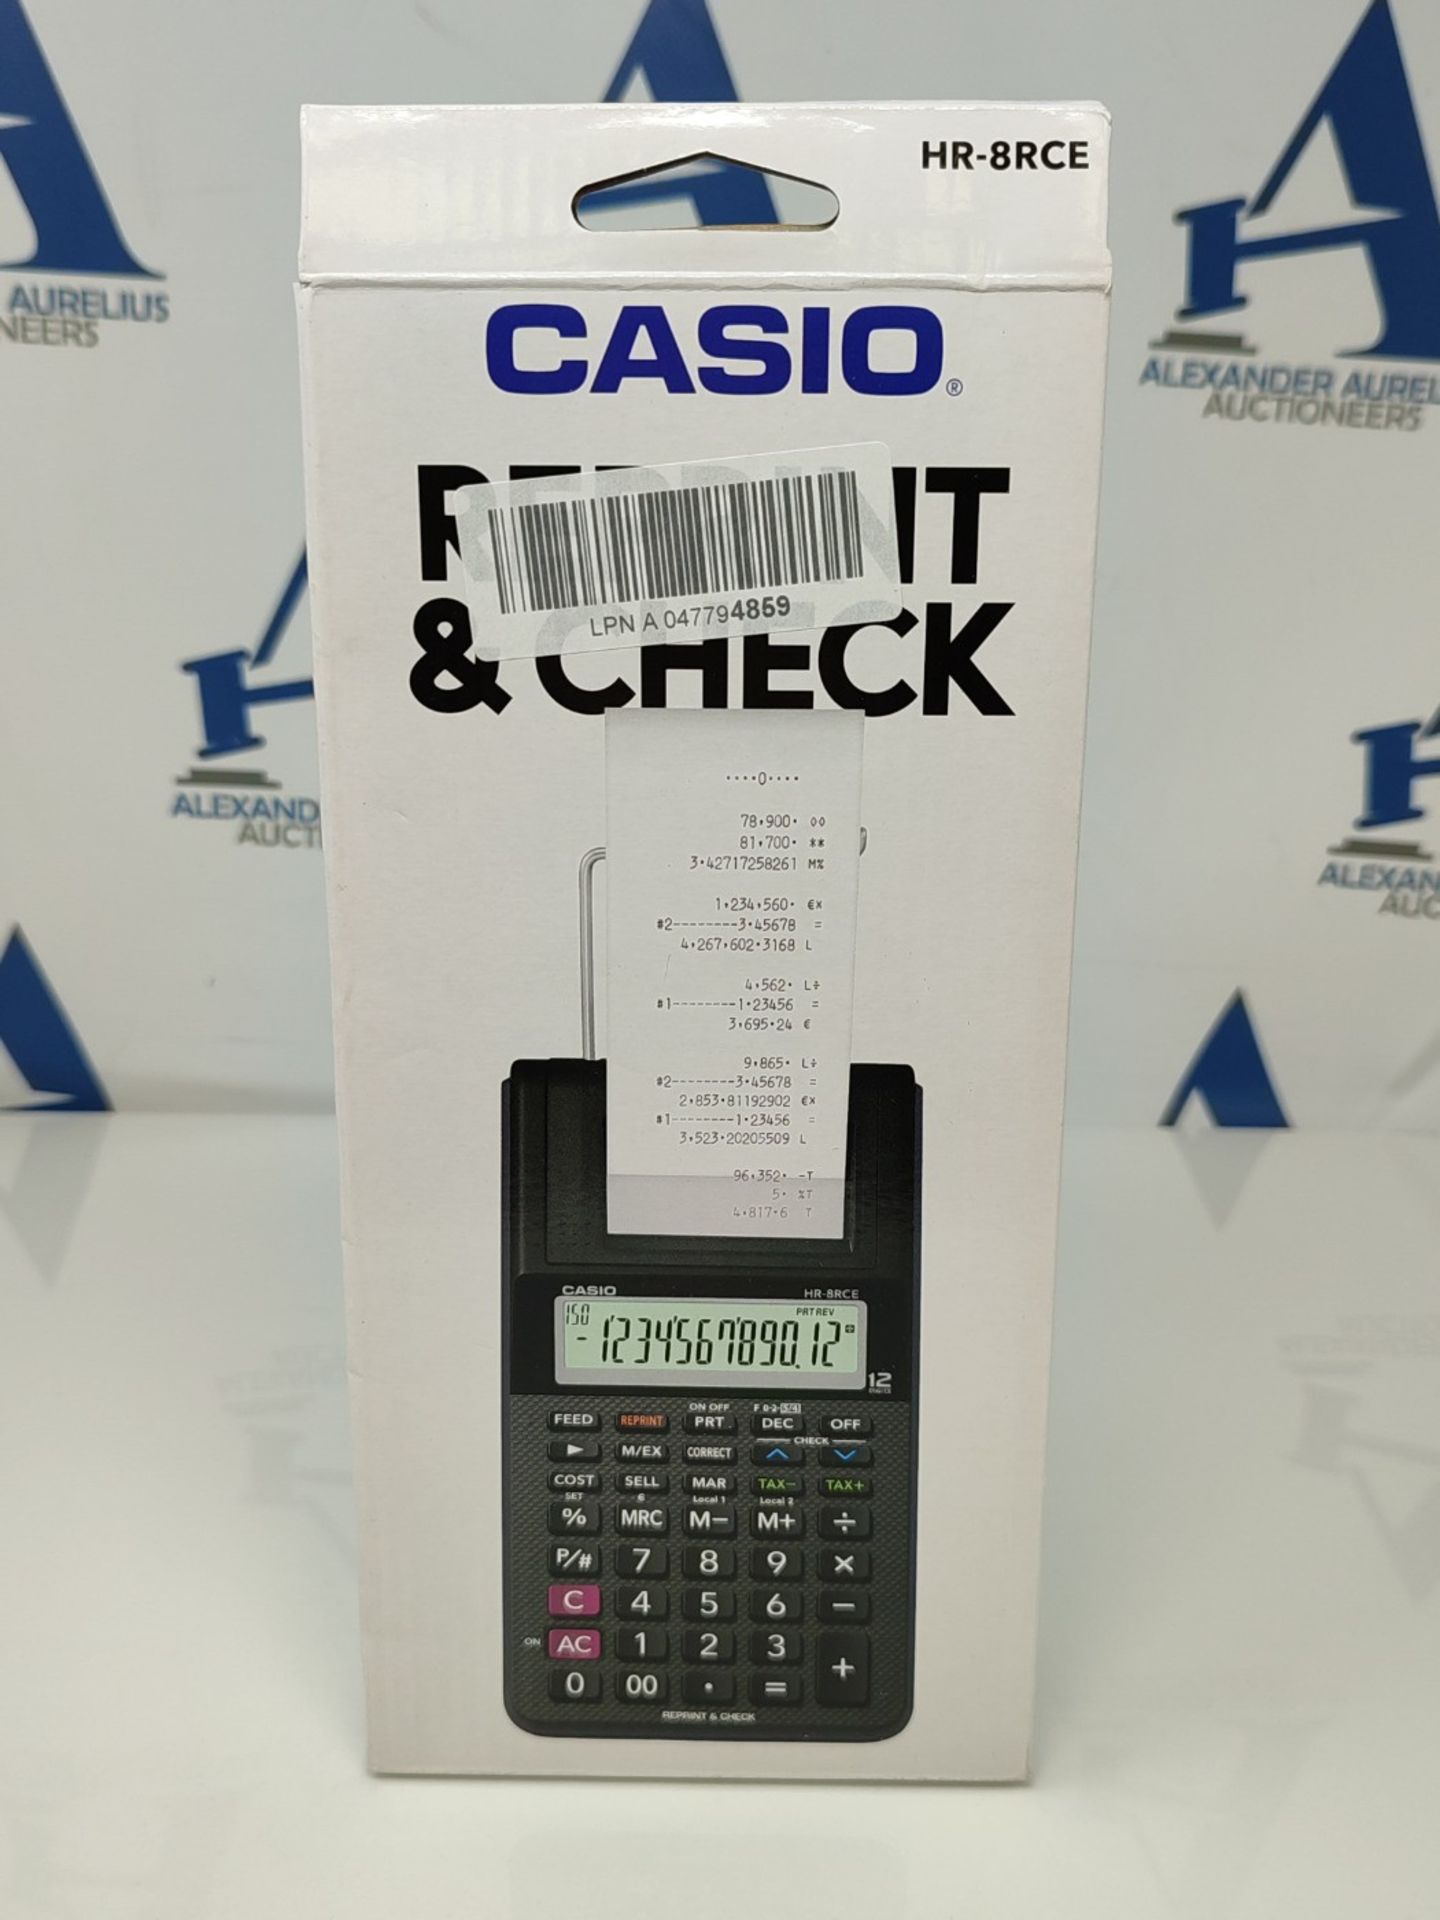 Casio HR-8RCE-BK Portable Printing Calculator, 12-Digit Display, Check and Correct Fun - Image 2 of 3